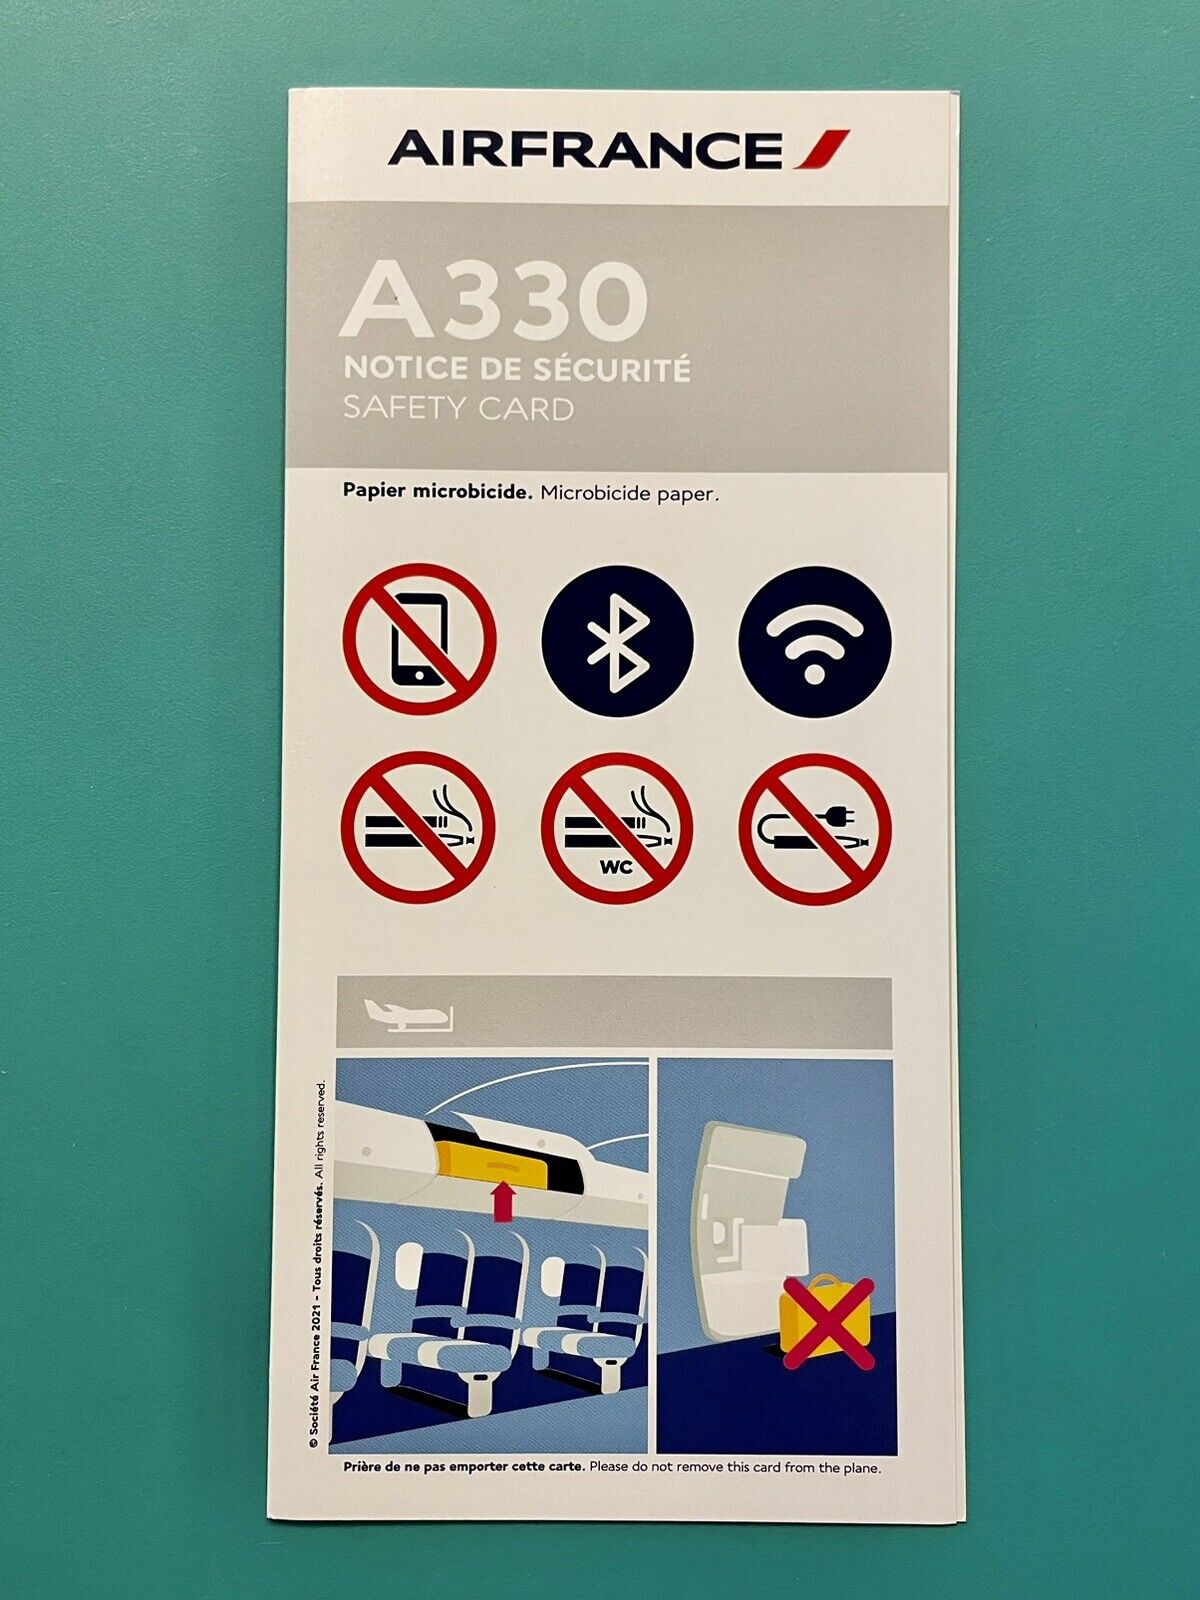 2022 AIR FRANCE SAFETY CARD — AIRBUS 330